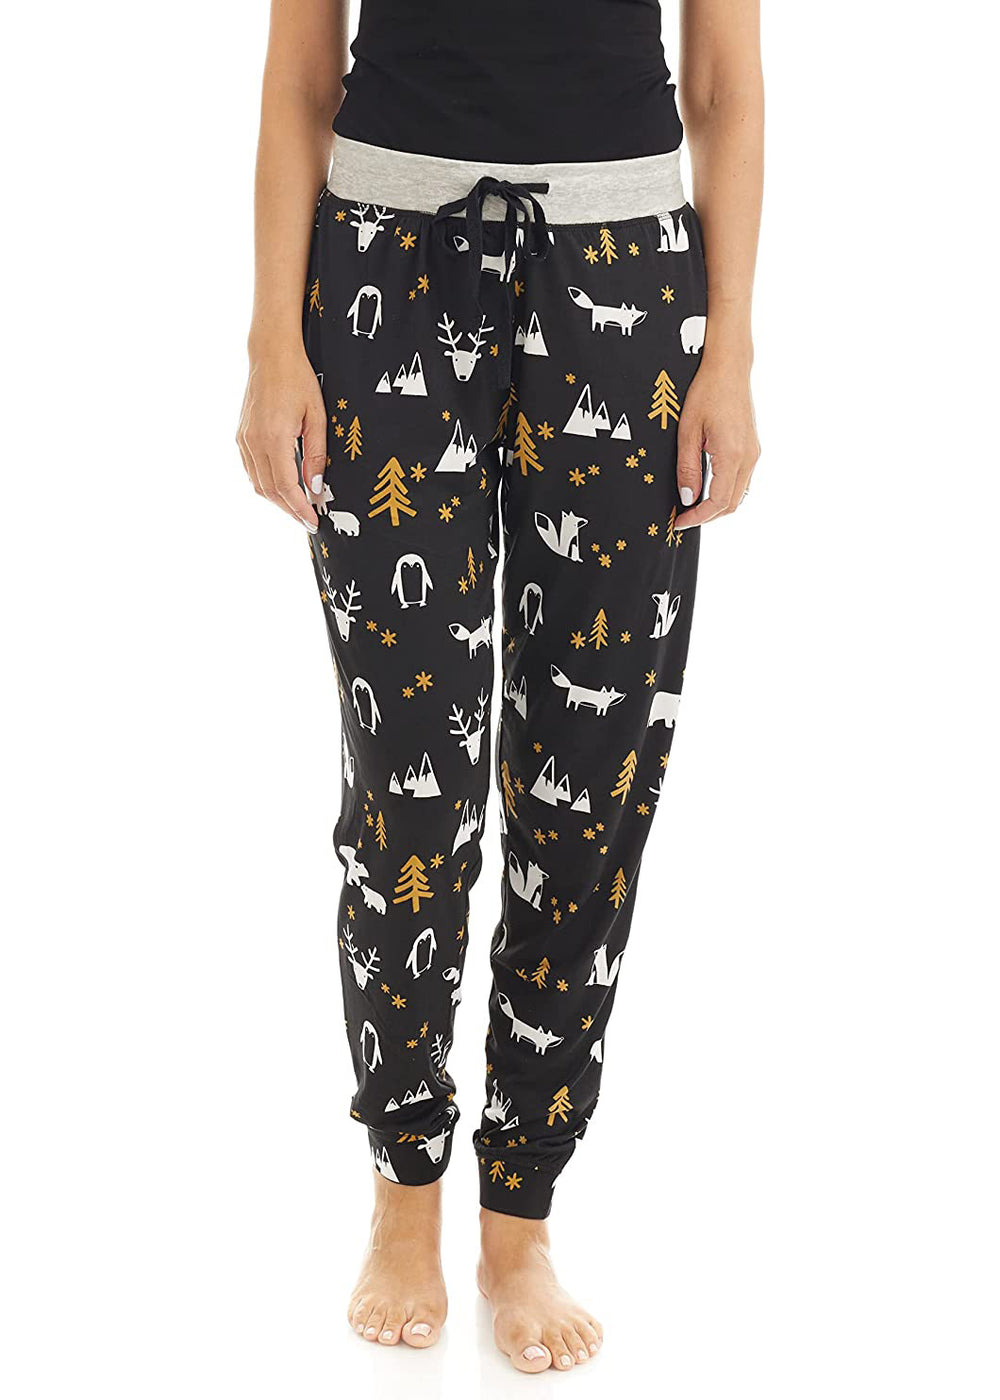 PJ joggers with soft velvety texture, stretch, elastic waistband, drawstring, and stylish ankle cuff. This pattern is little woodland creatures, like a foxm deer, penguin, and some mountains, trees. The pattern is gold and white on a black background. The waist is light grey with a black drawstring. Very cute. 